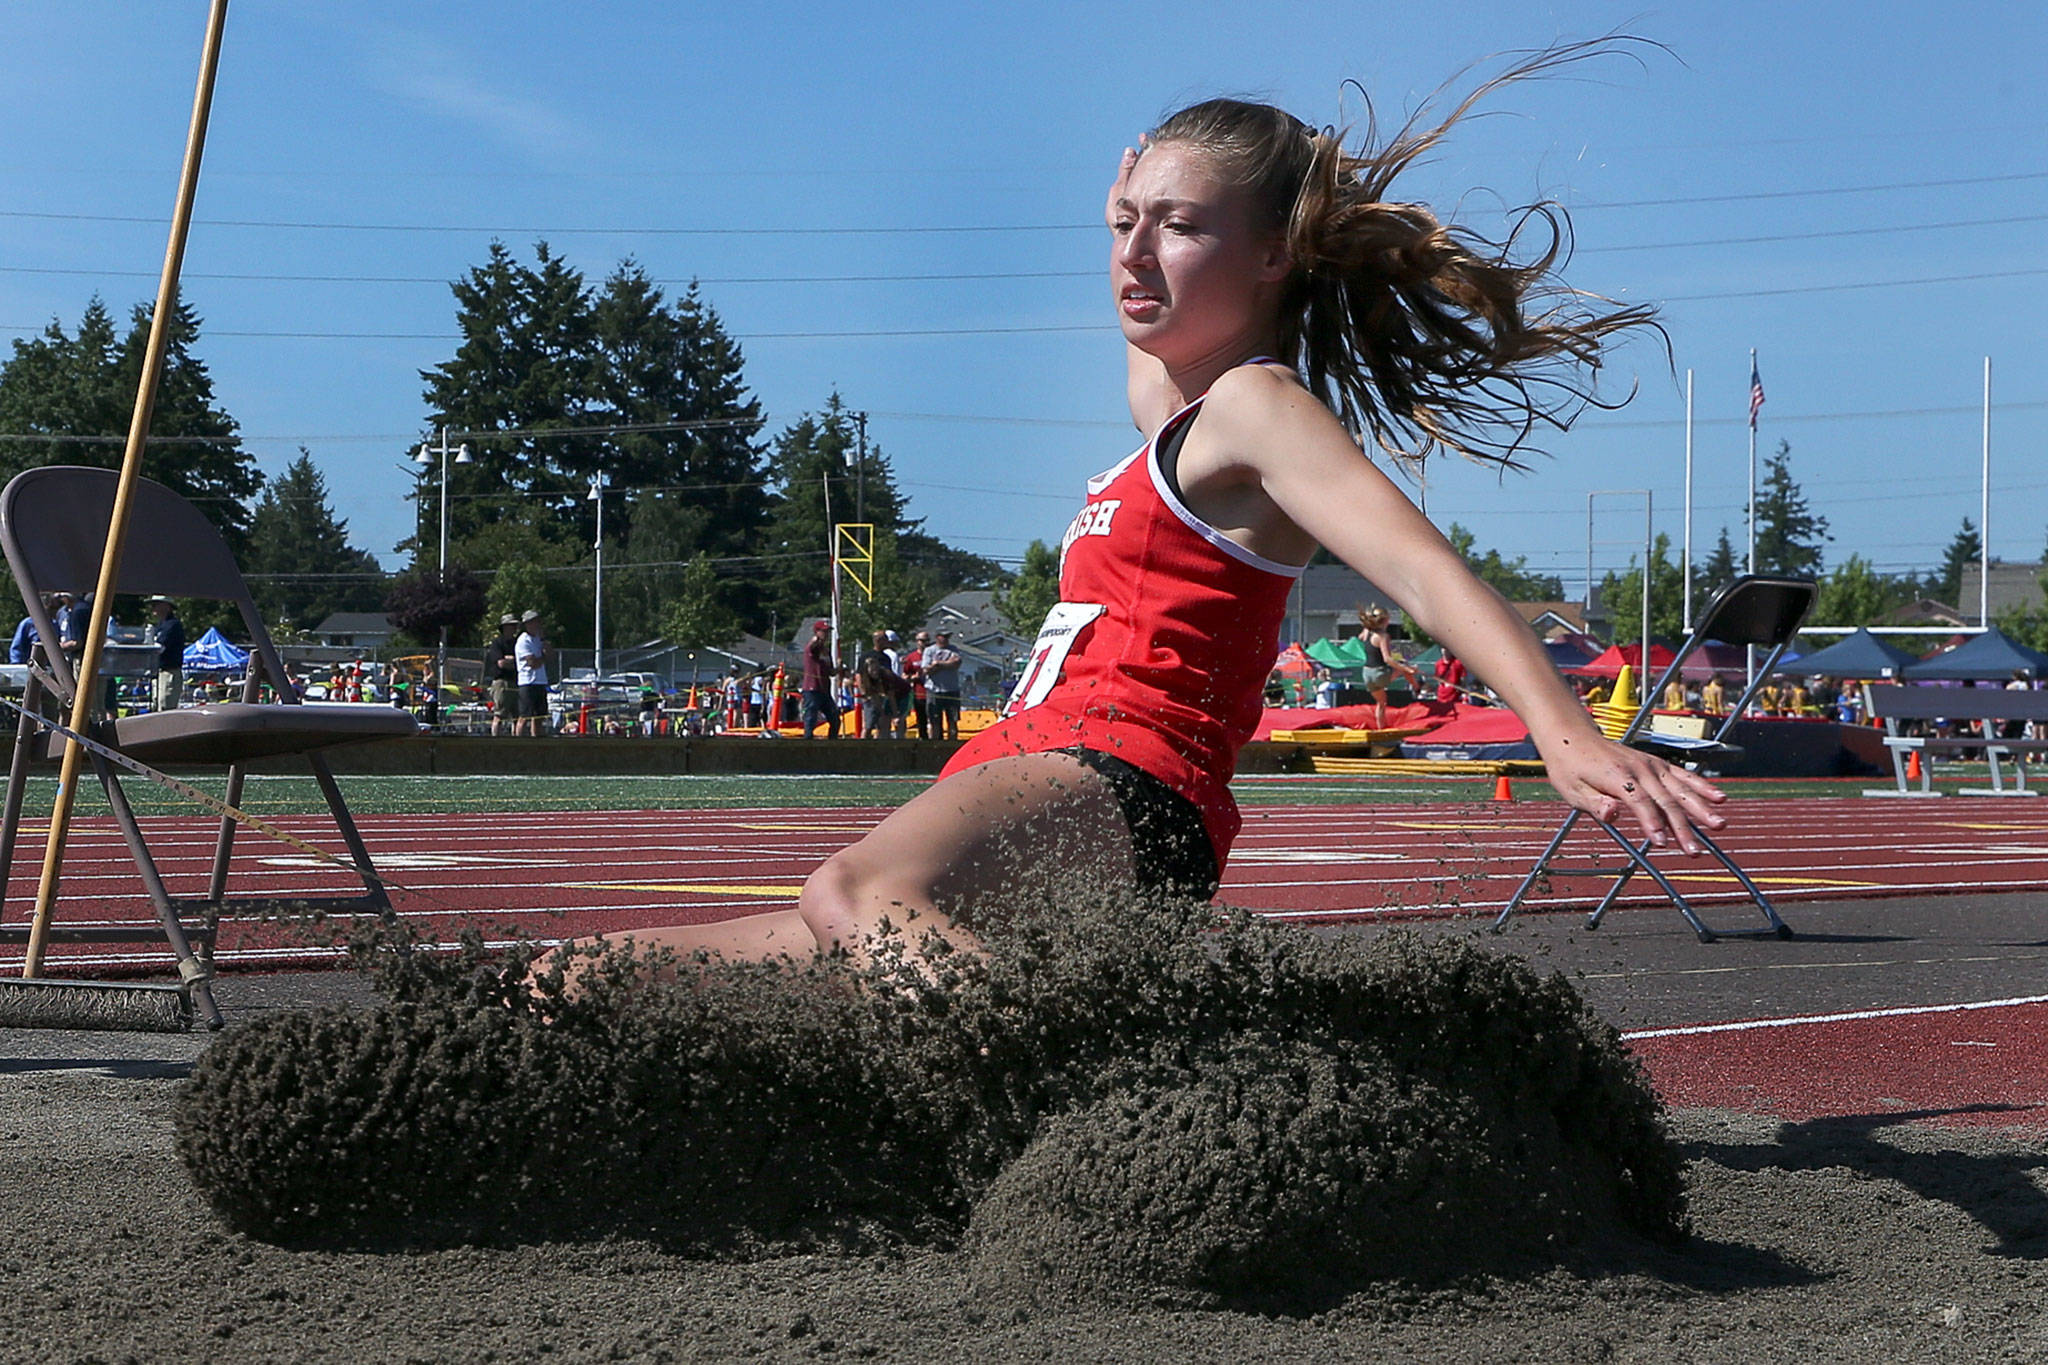 Snohomish’s Bree Nichols lands in the triple jump pit during the first day of competition at the 4A/3A/2A State Track Field Championships on Thursday at Mount Tahoma High School in Tacoma. (Kevin Clark / The Herald)